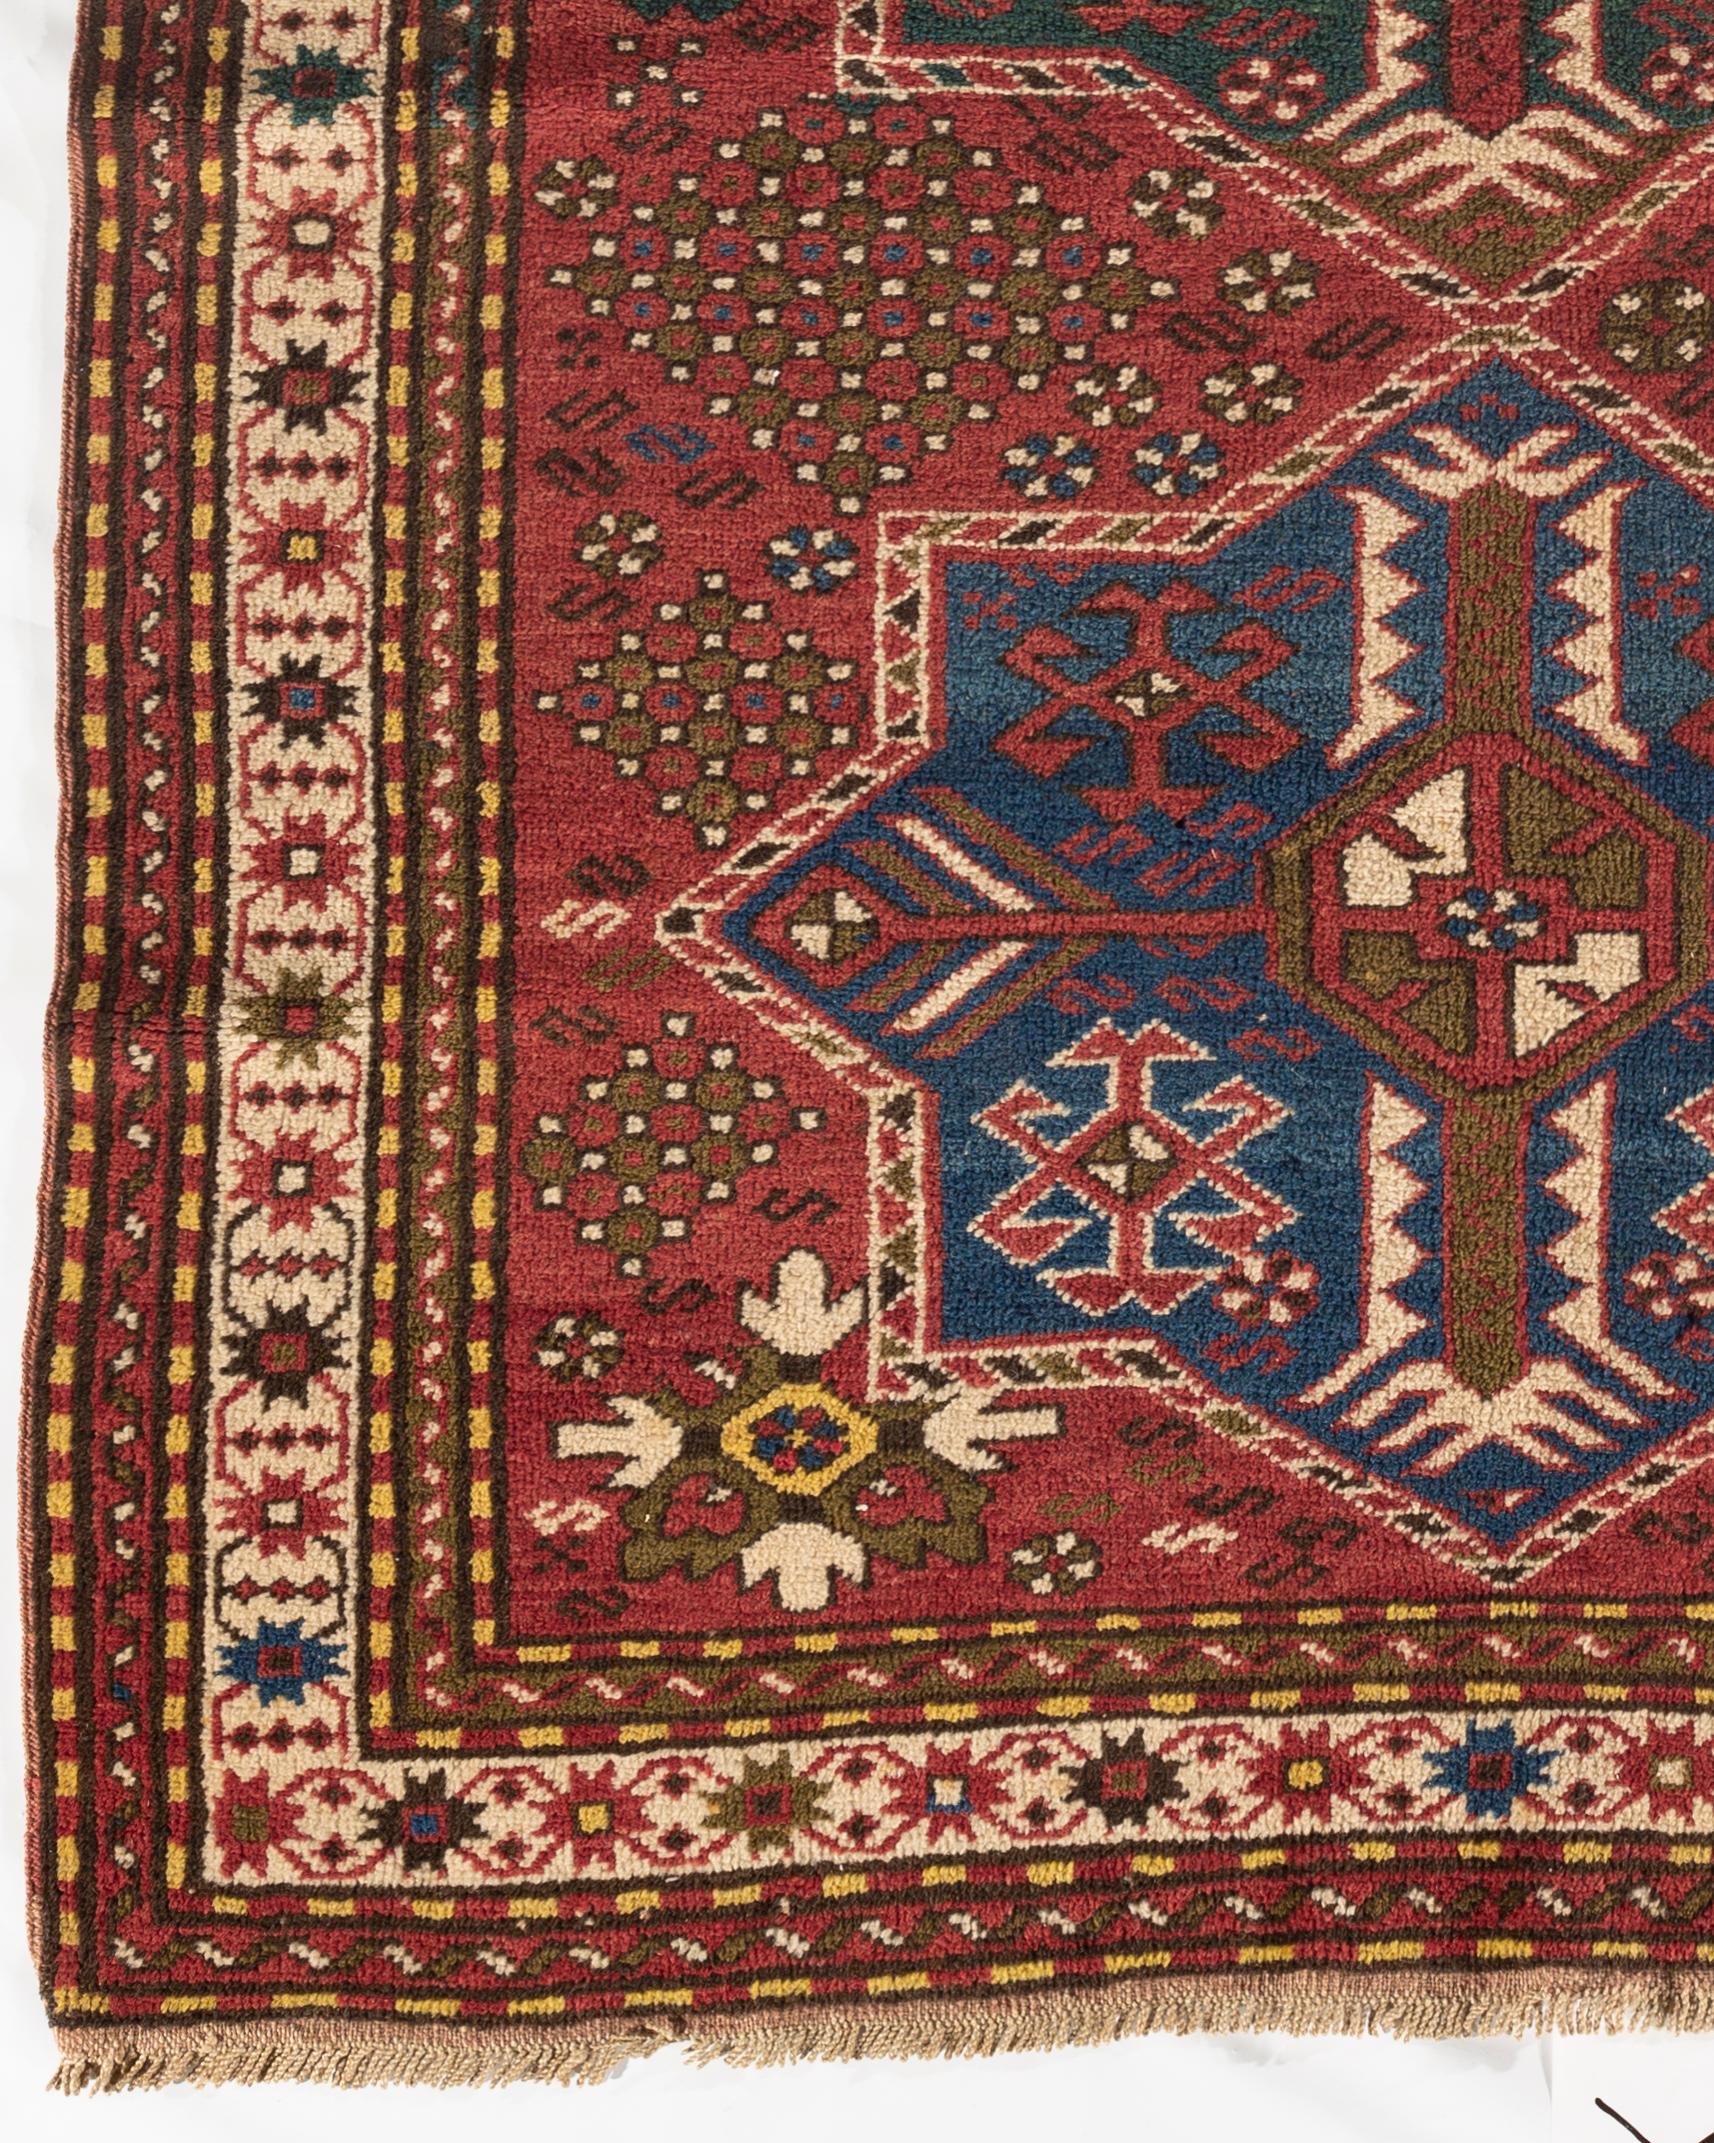 Antique Caucasian Kazak rug, circa 1880. A south west Caucasian Kazak handwoven rug, circa 1880. The detail in the design and craftsmanship in the weaving has created a true work of art. The Caucasus Mountains, between Persia and Russia are justly